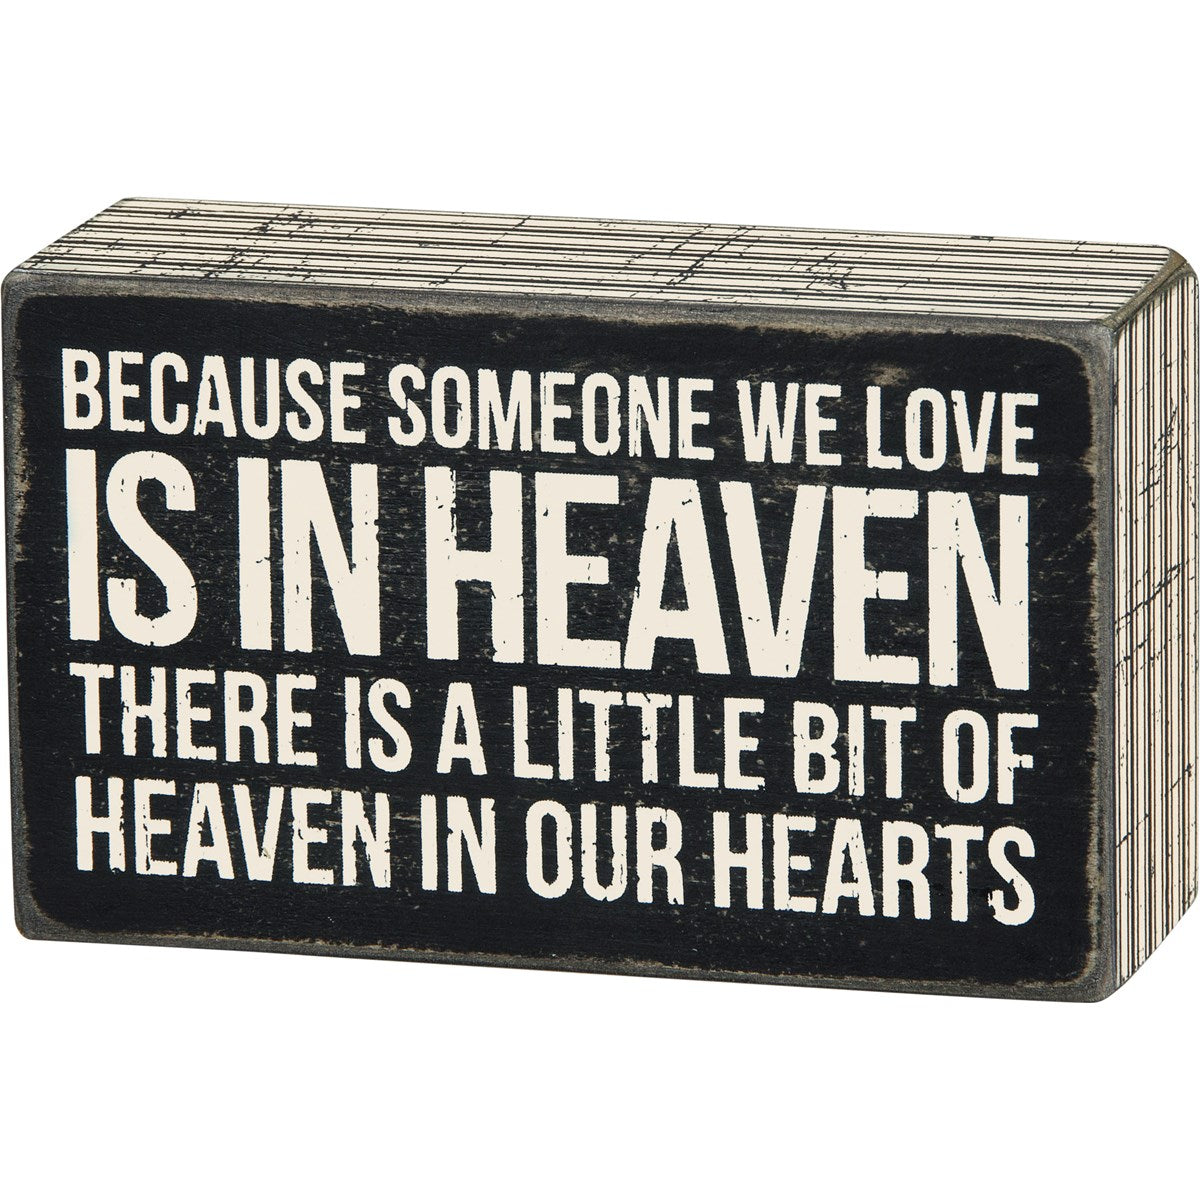 In Our Hearts Box Sign